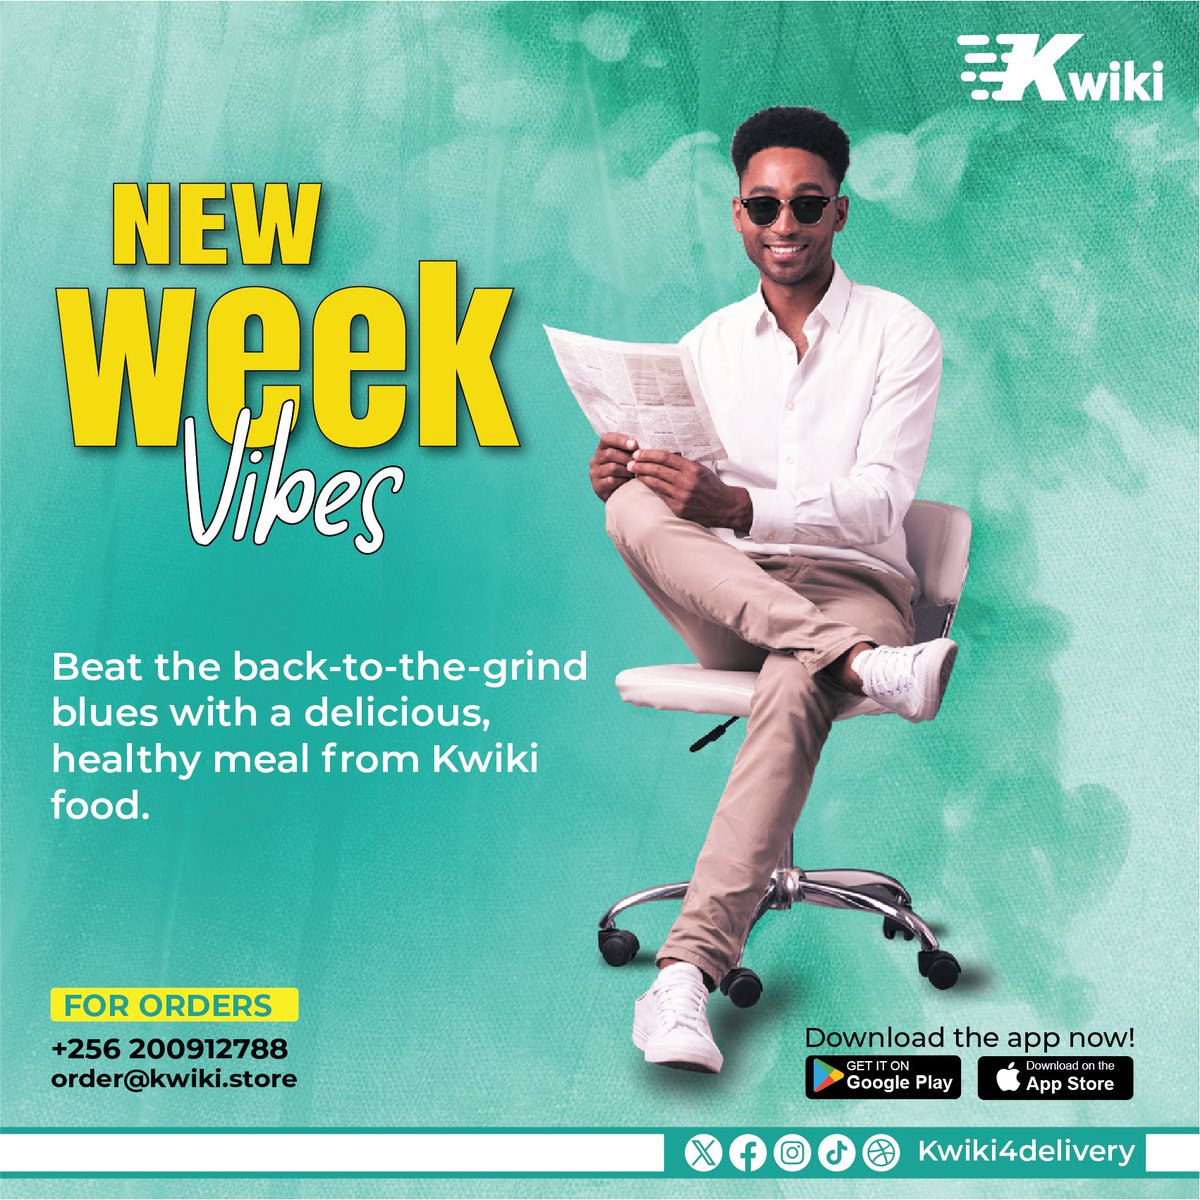 No need to let the Monday blues get you down! Kwiki Food can help you conquer those back-to-the-grind feelings with a delicious and healthy meal.

#fastdelivery #kwiki4delivery #fooddelivery #fy #fyp #fypシ #foryoupage #foryou  #delivery #food #blessedweek #newweek #inspiration